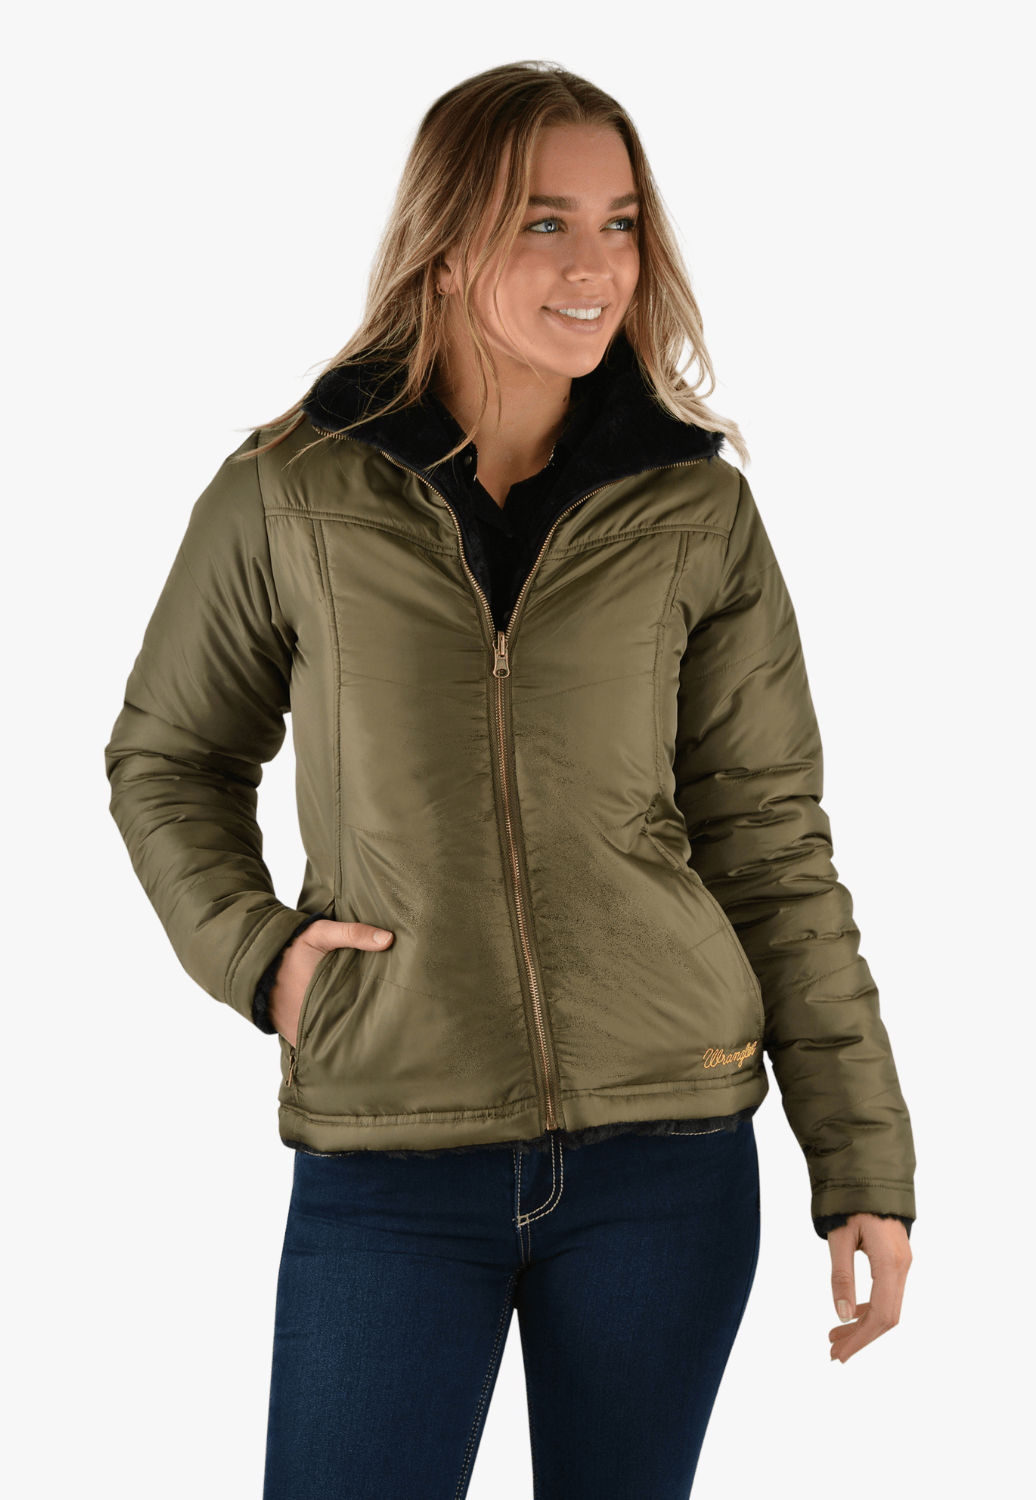 Wrangler Womens Carrie Reversible Jacket - W. Titley & Co